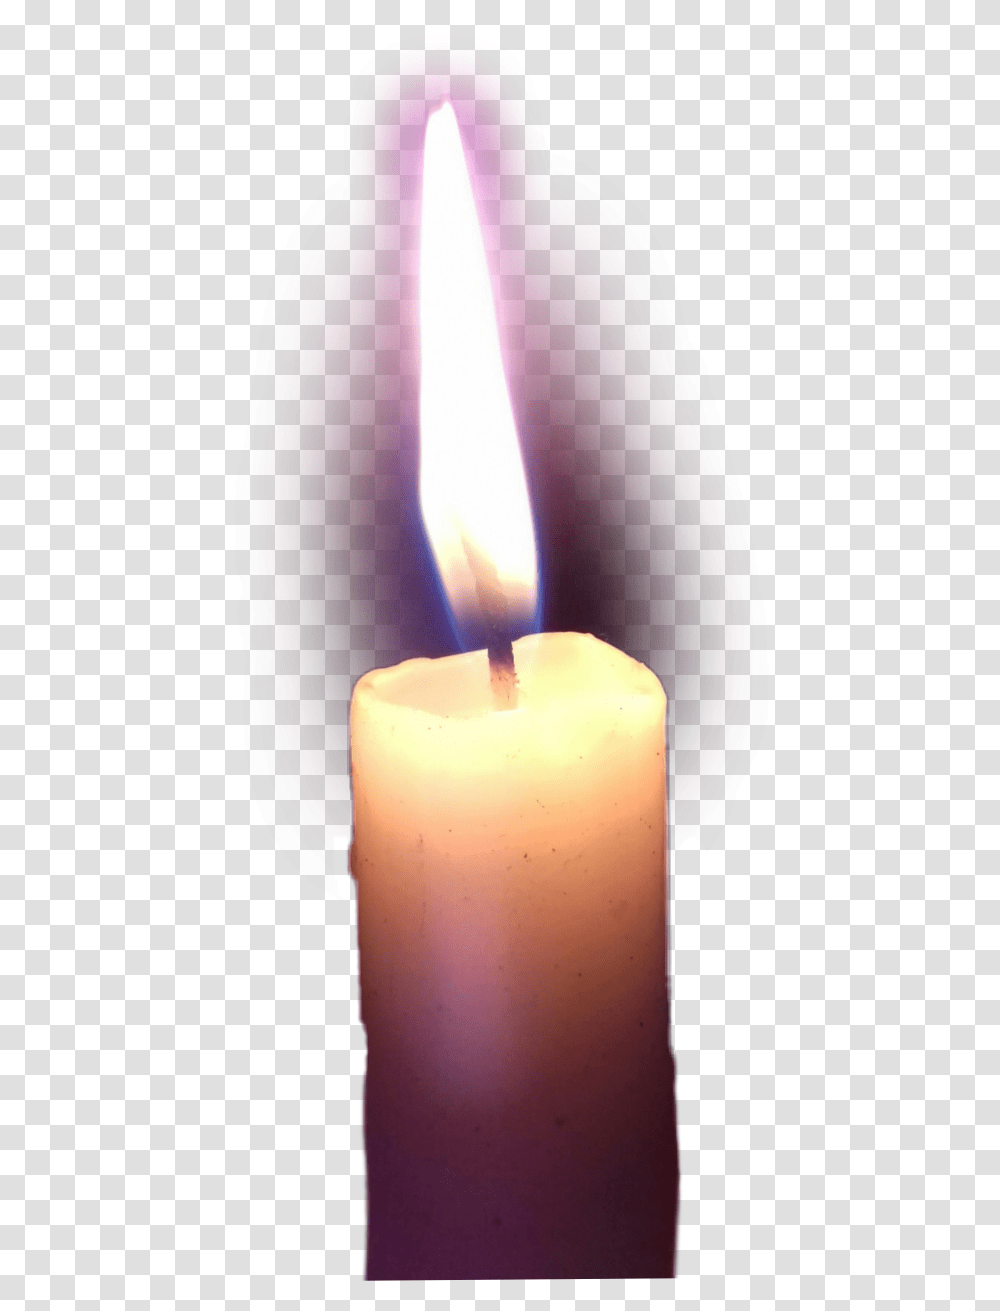 Candle Flame Lit Dark Light Made From The Artist Advent Candle Transparent Png